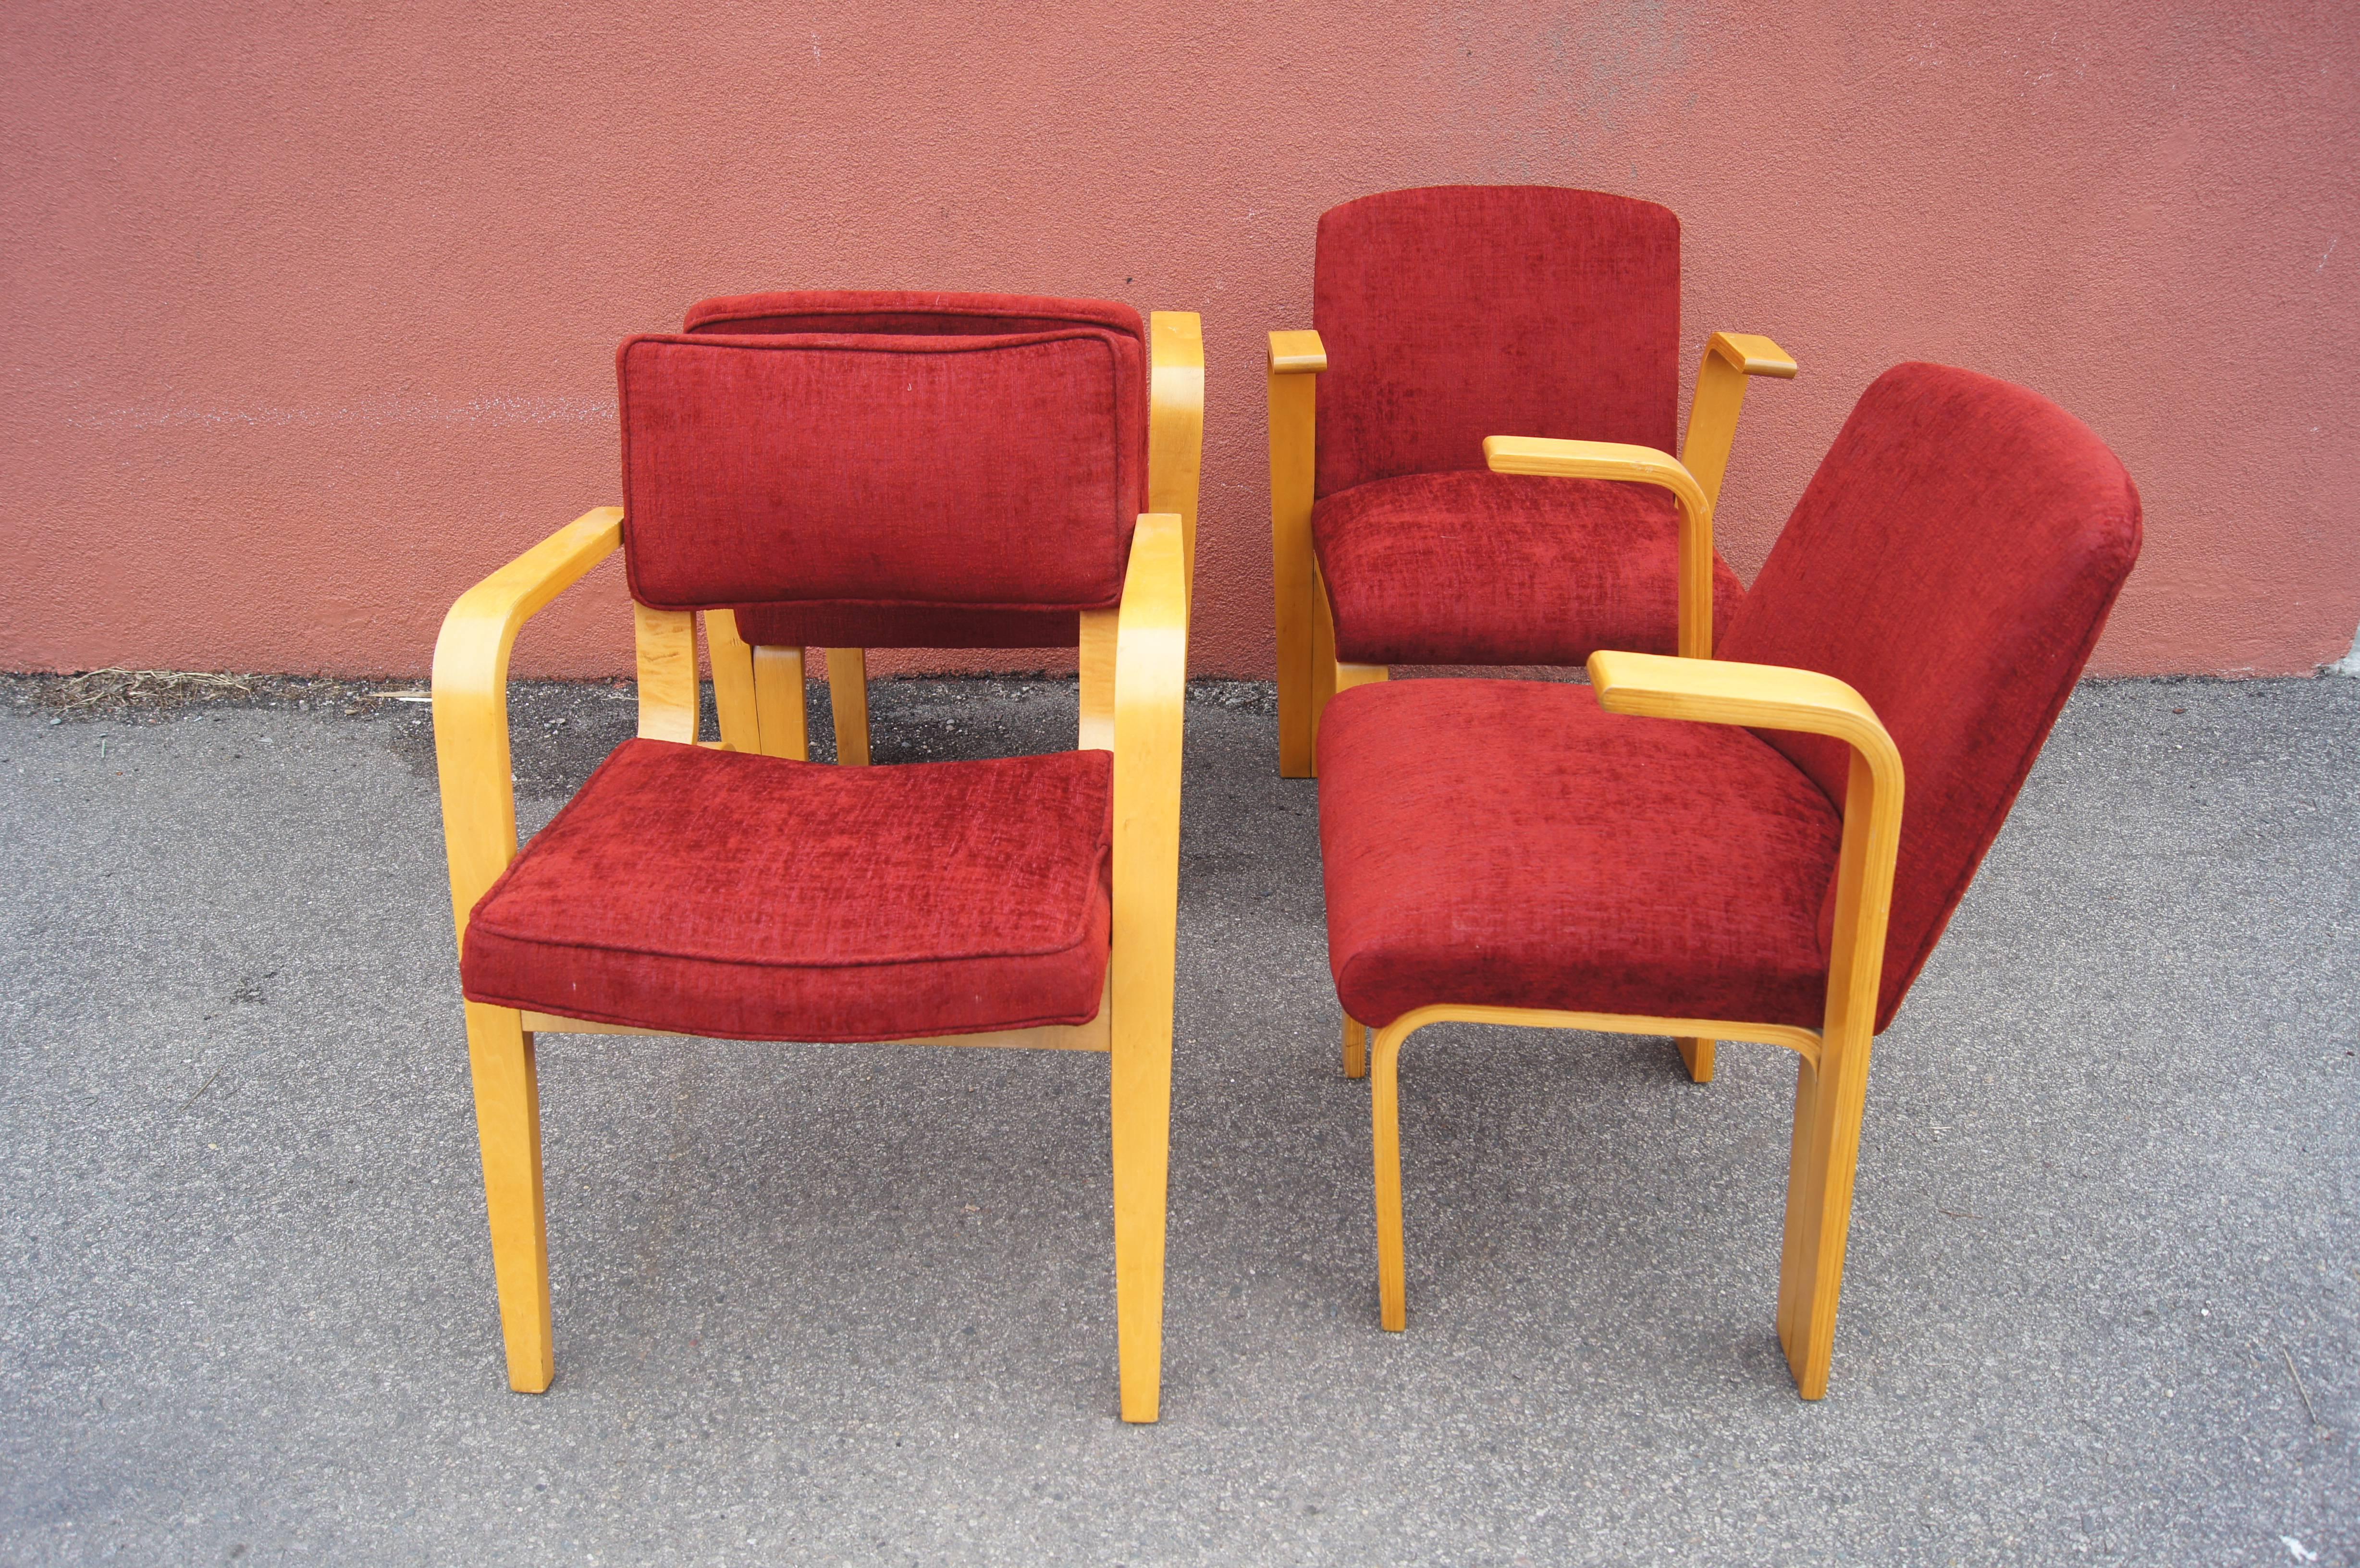 Upholstered in a soft textile in vibrant red, these four birch armchairs are classic modernist bentwood by Thonet. Three chairs, attributed to Joe Atkinson, sport solid seat backs and abbreviated armrests that emerge from the hairpin back legs. The